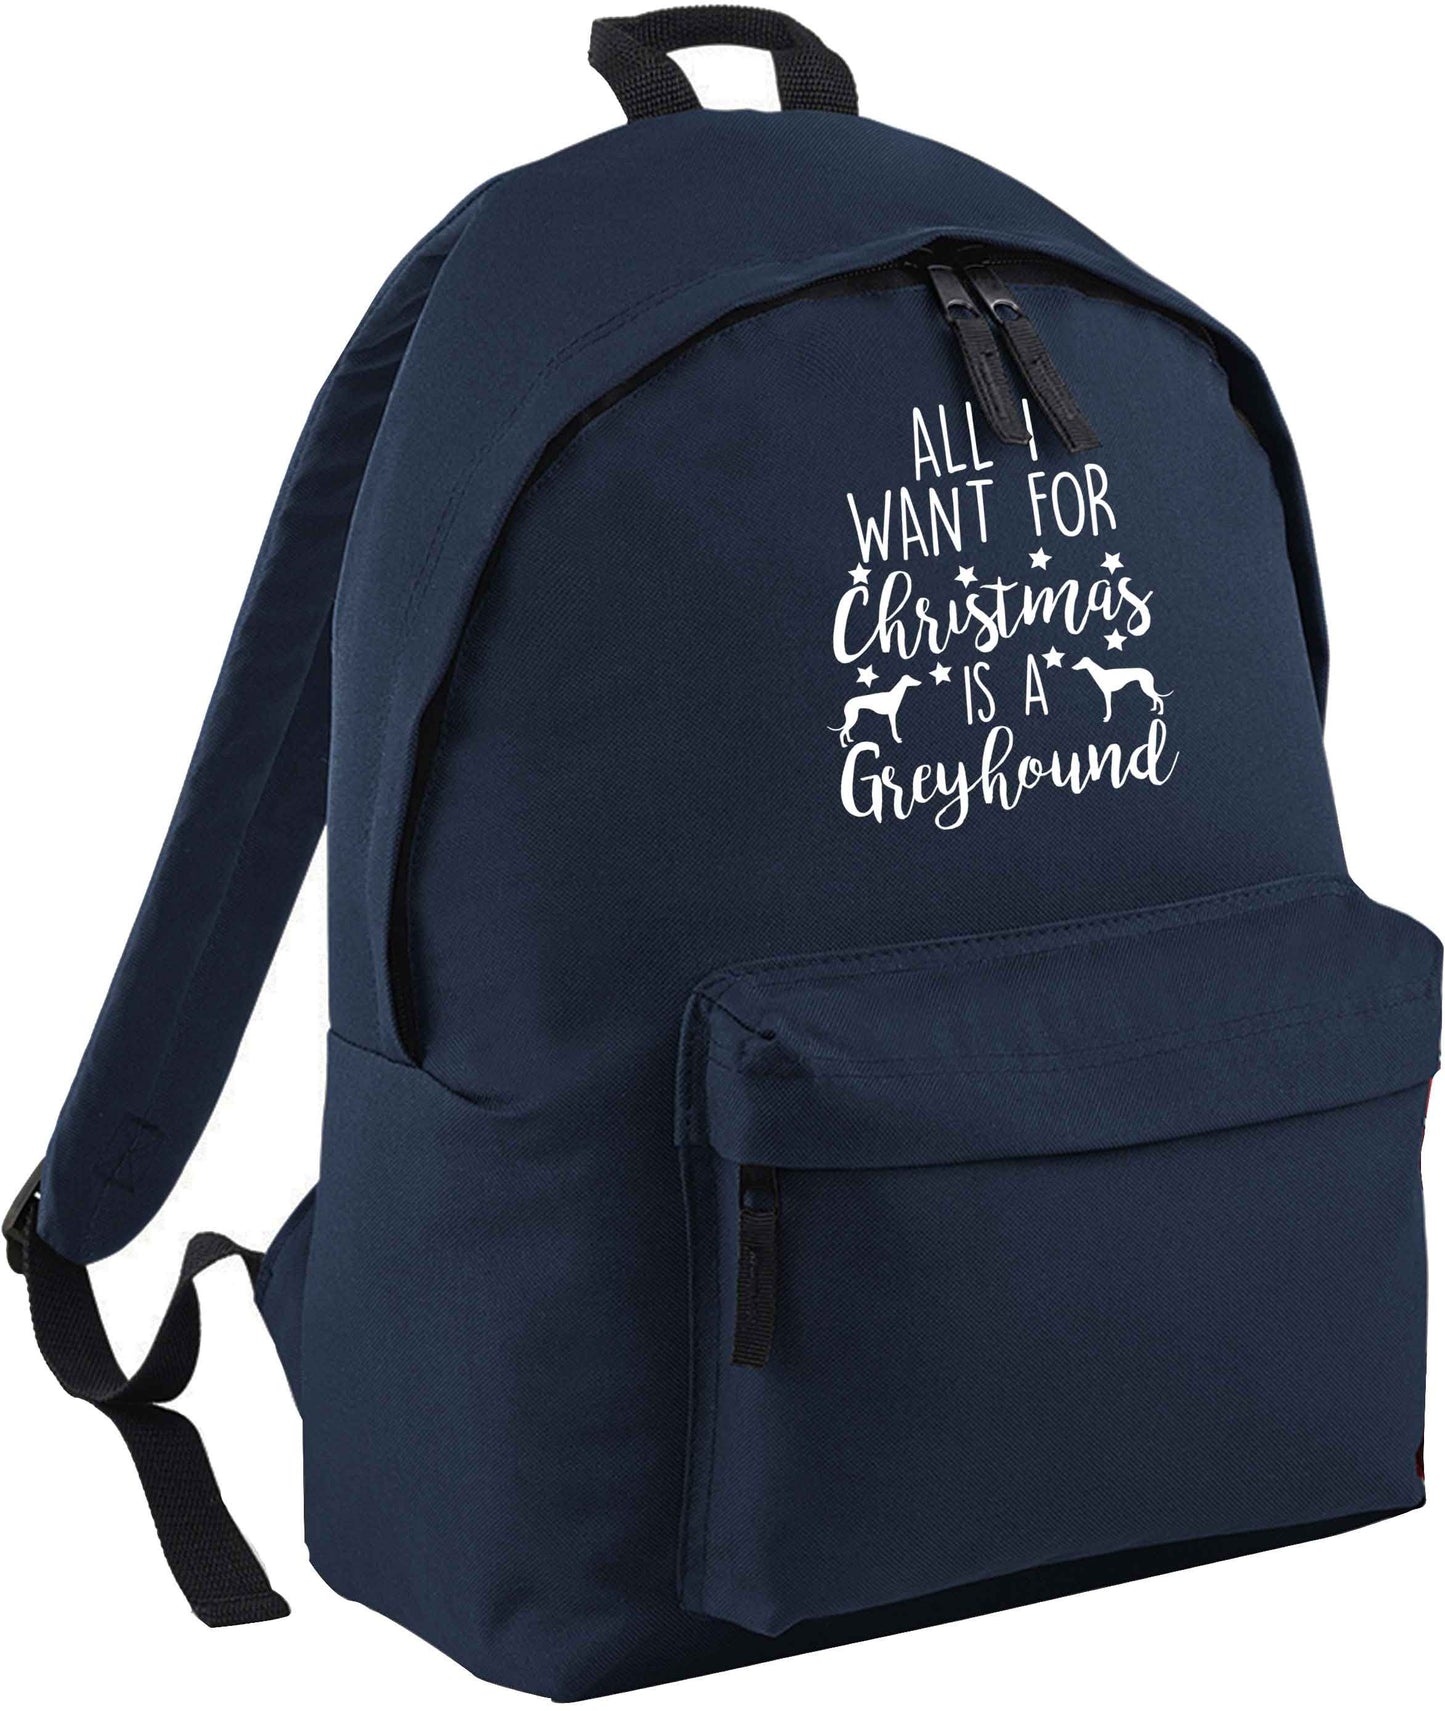 All I want for Christmas is a greyhound navy adults backpack